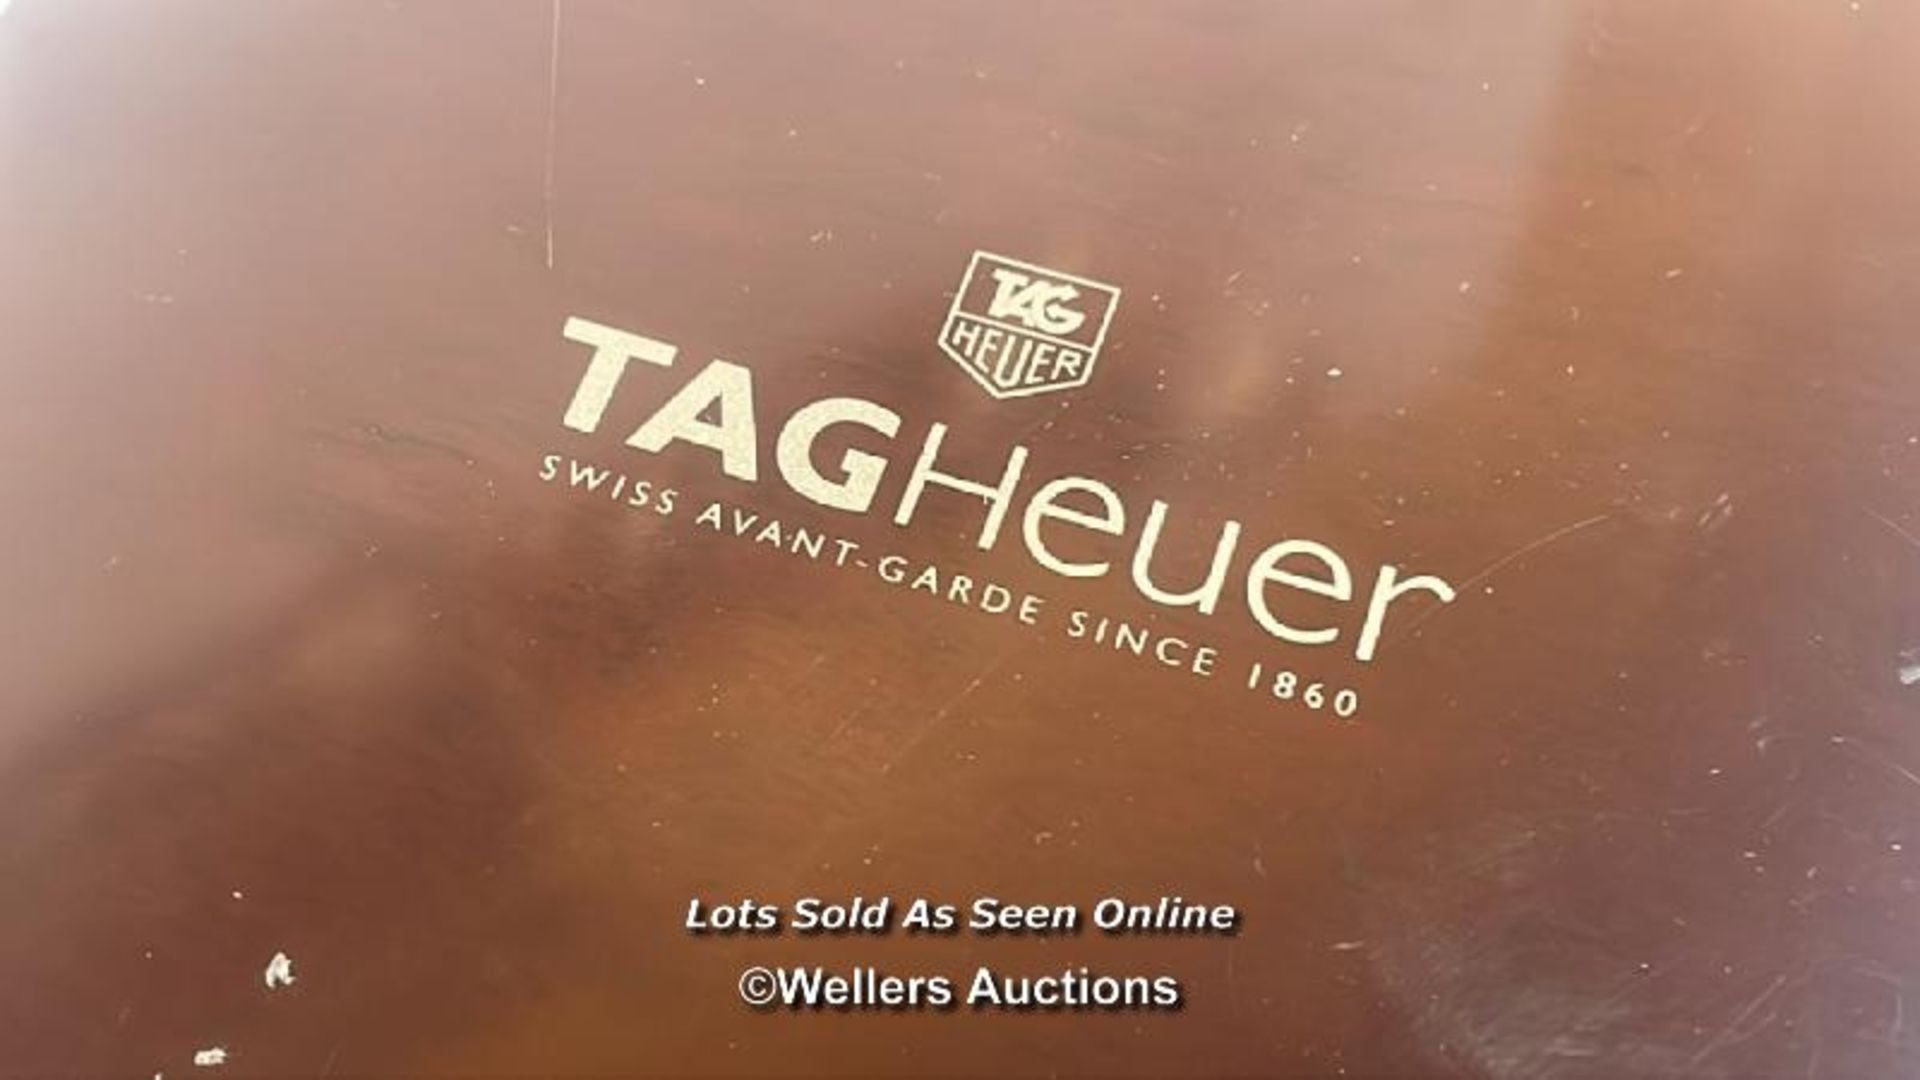 Tag Heuer aqua racer stainless steel wristwatch no. CAF101F, 3.3cm dial, good cosmetic condition - Bild 19 aus 20